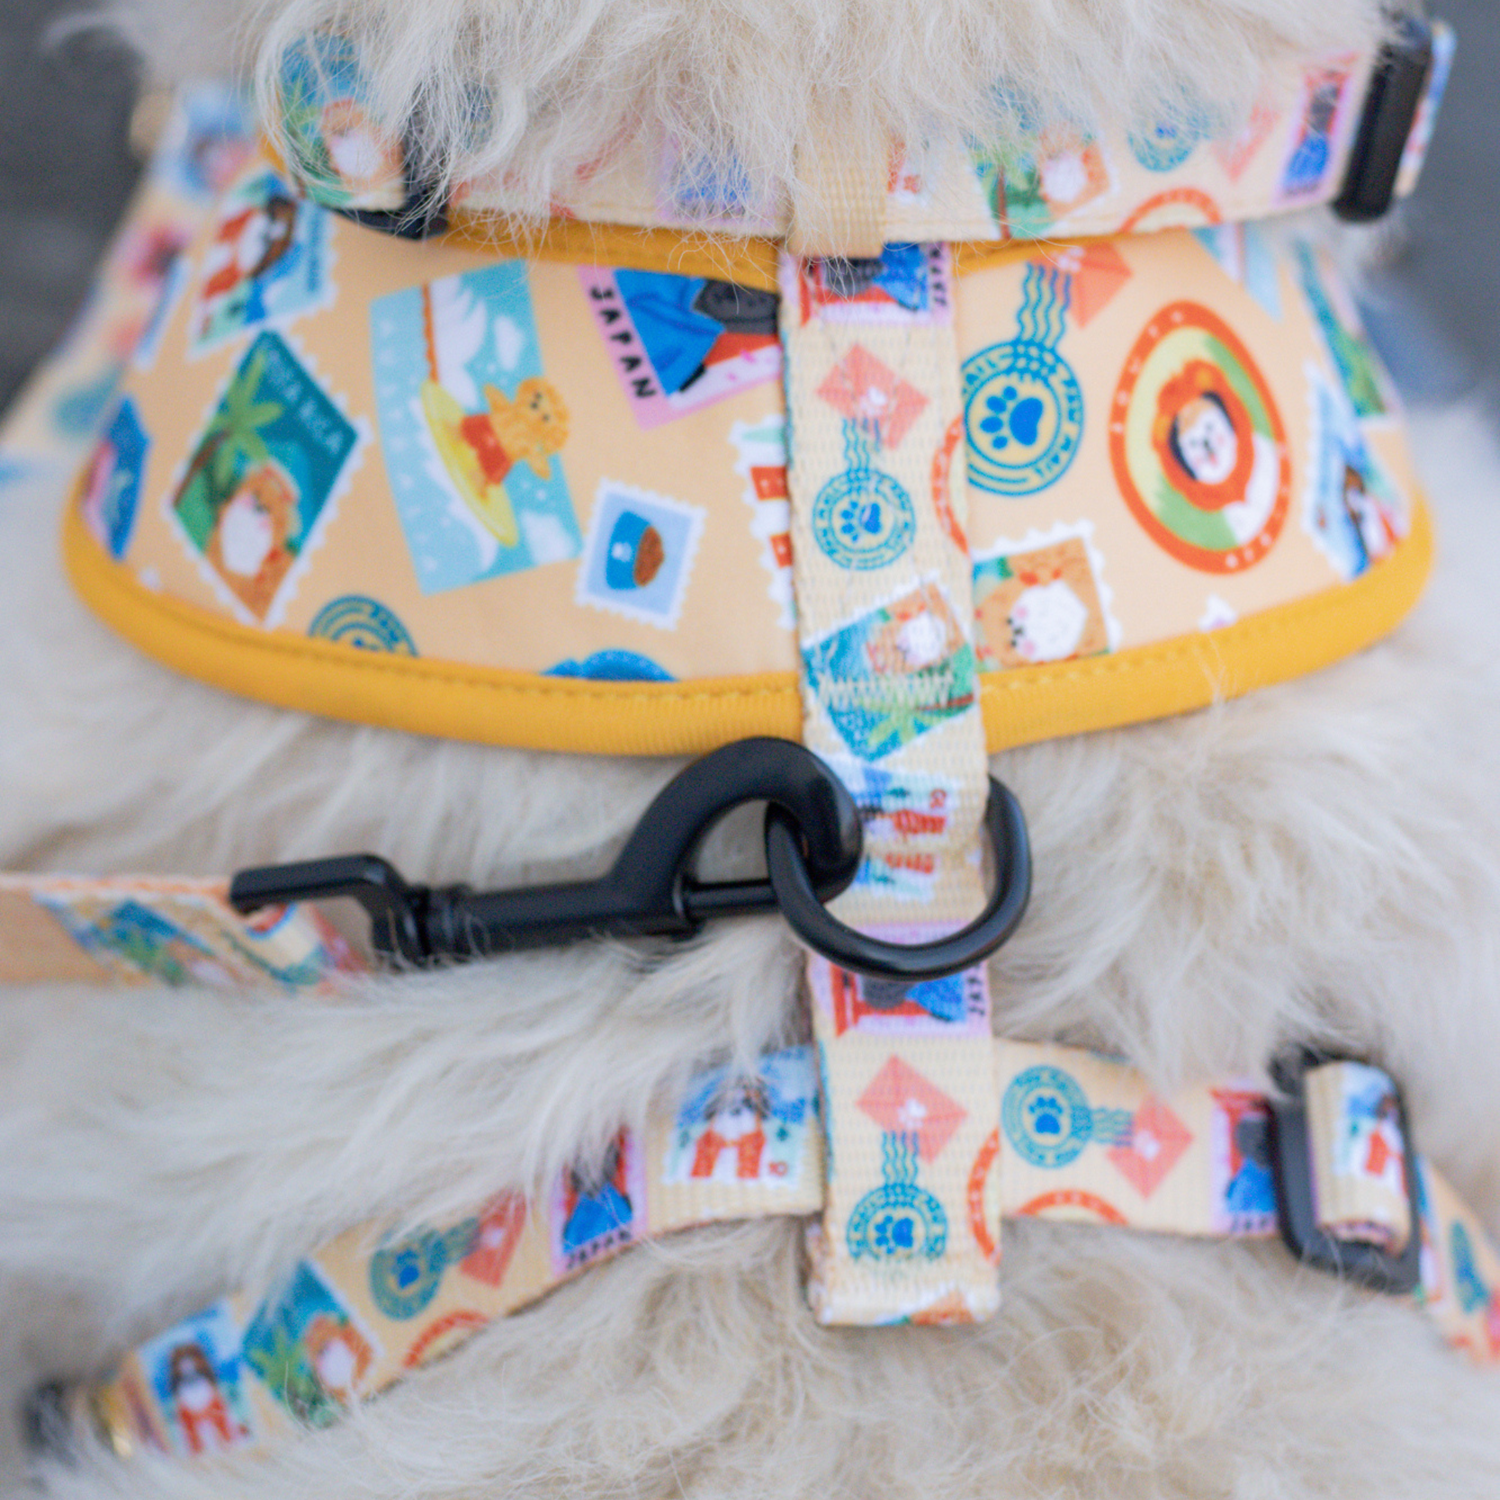 Miss Maca, fluffy dog influencer, wearing Pata Paw's Traveling Pups harness (size L)